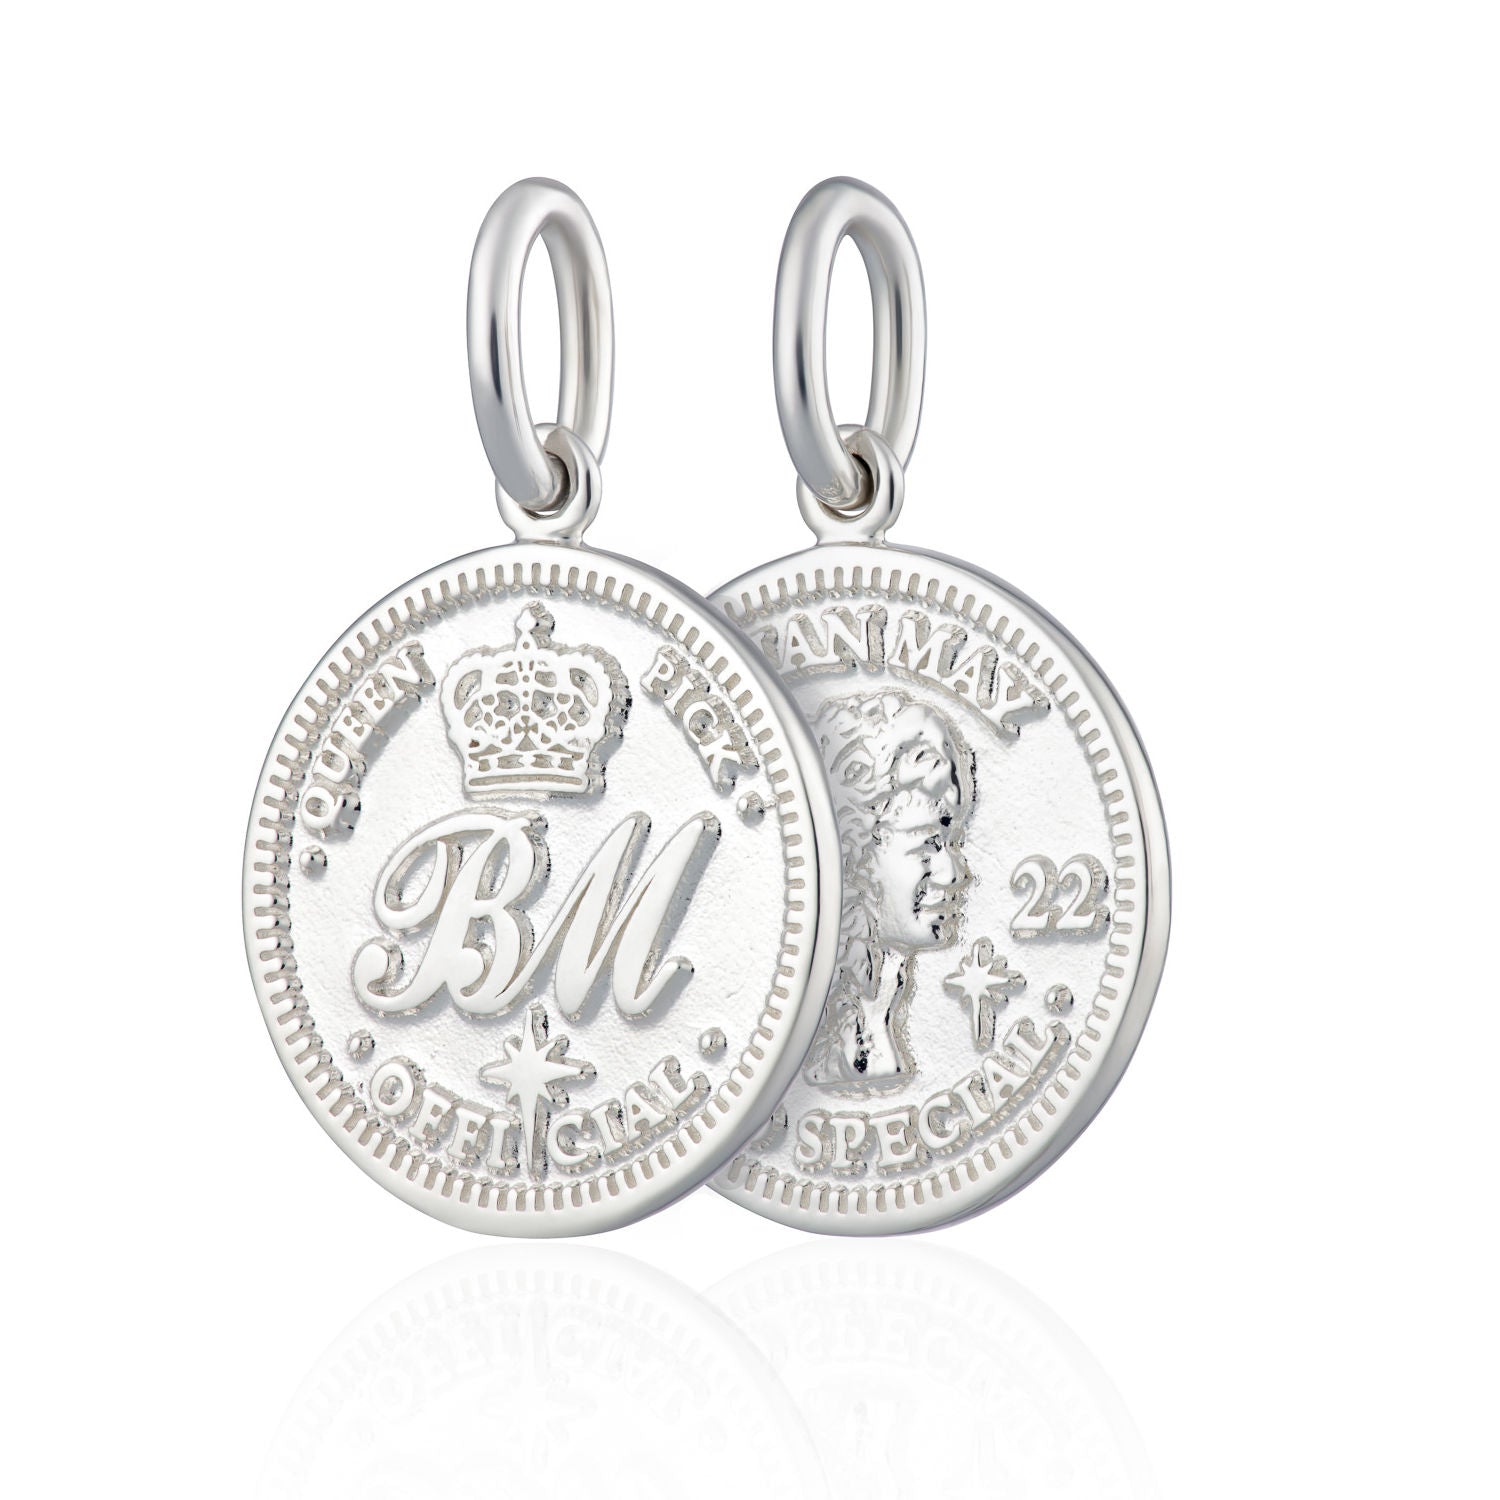 Queen - Brian May Sixpence Charm